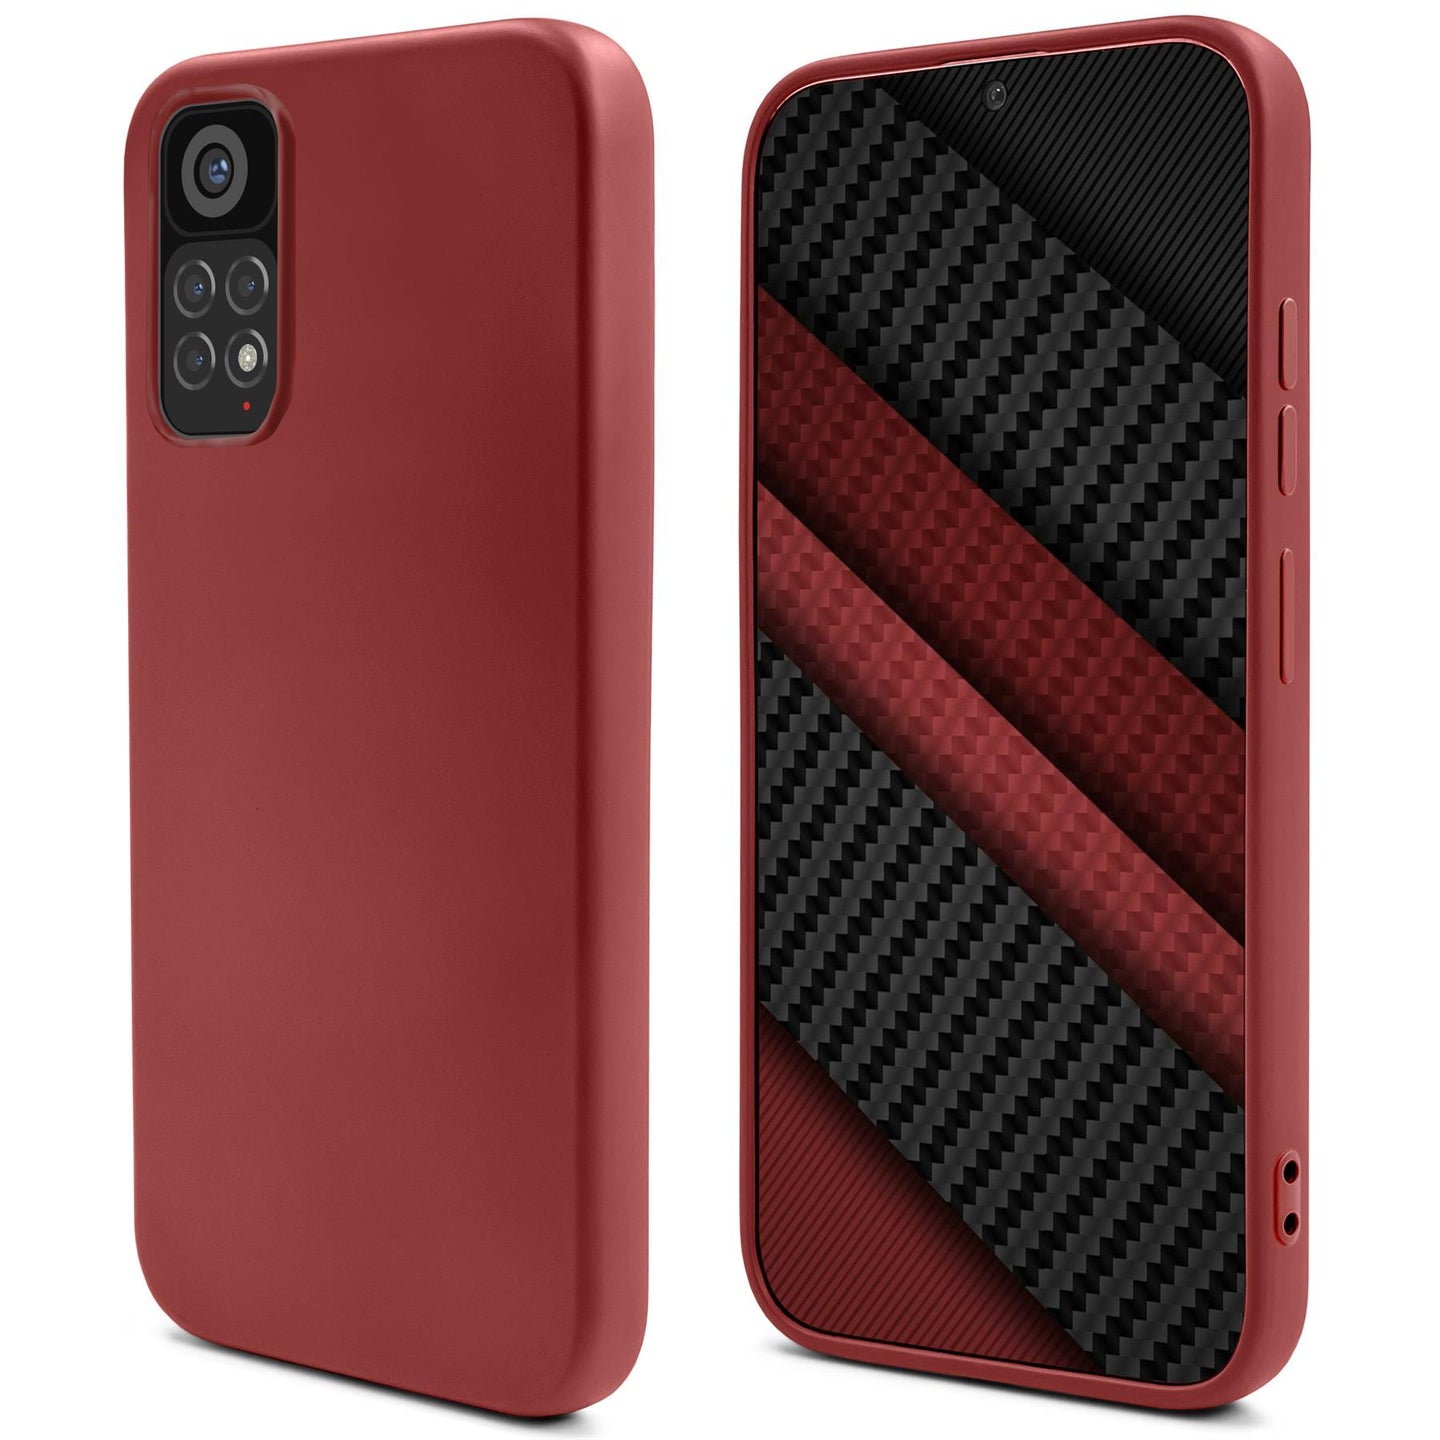 Moozy Lifestyle. Silicone Case for Xiaomi Redmi Note 11 Pro 5G and 4G, Vintage Pink - Liquid Silicone Lightweight Cover with Matte Finish and Soft Microfiber Lining, Premium Silicone Case